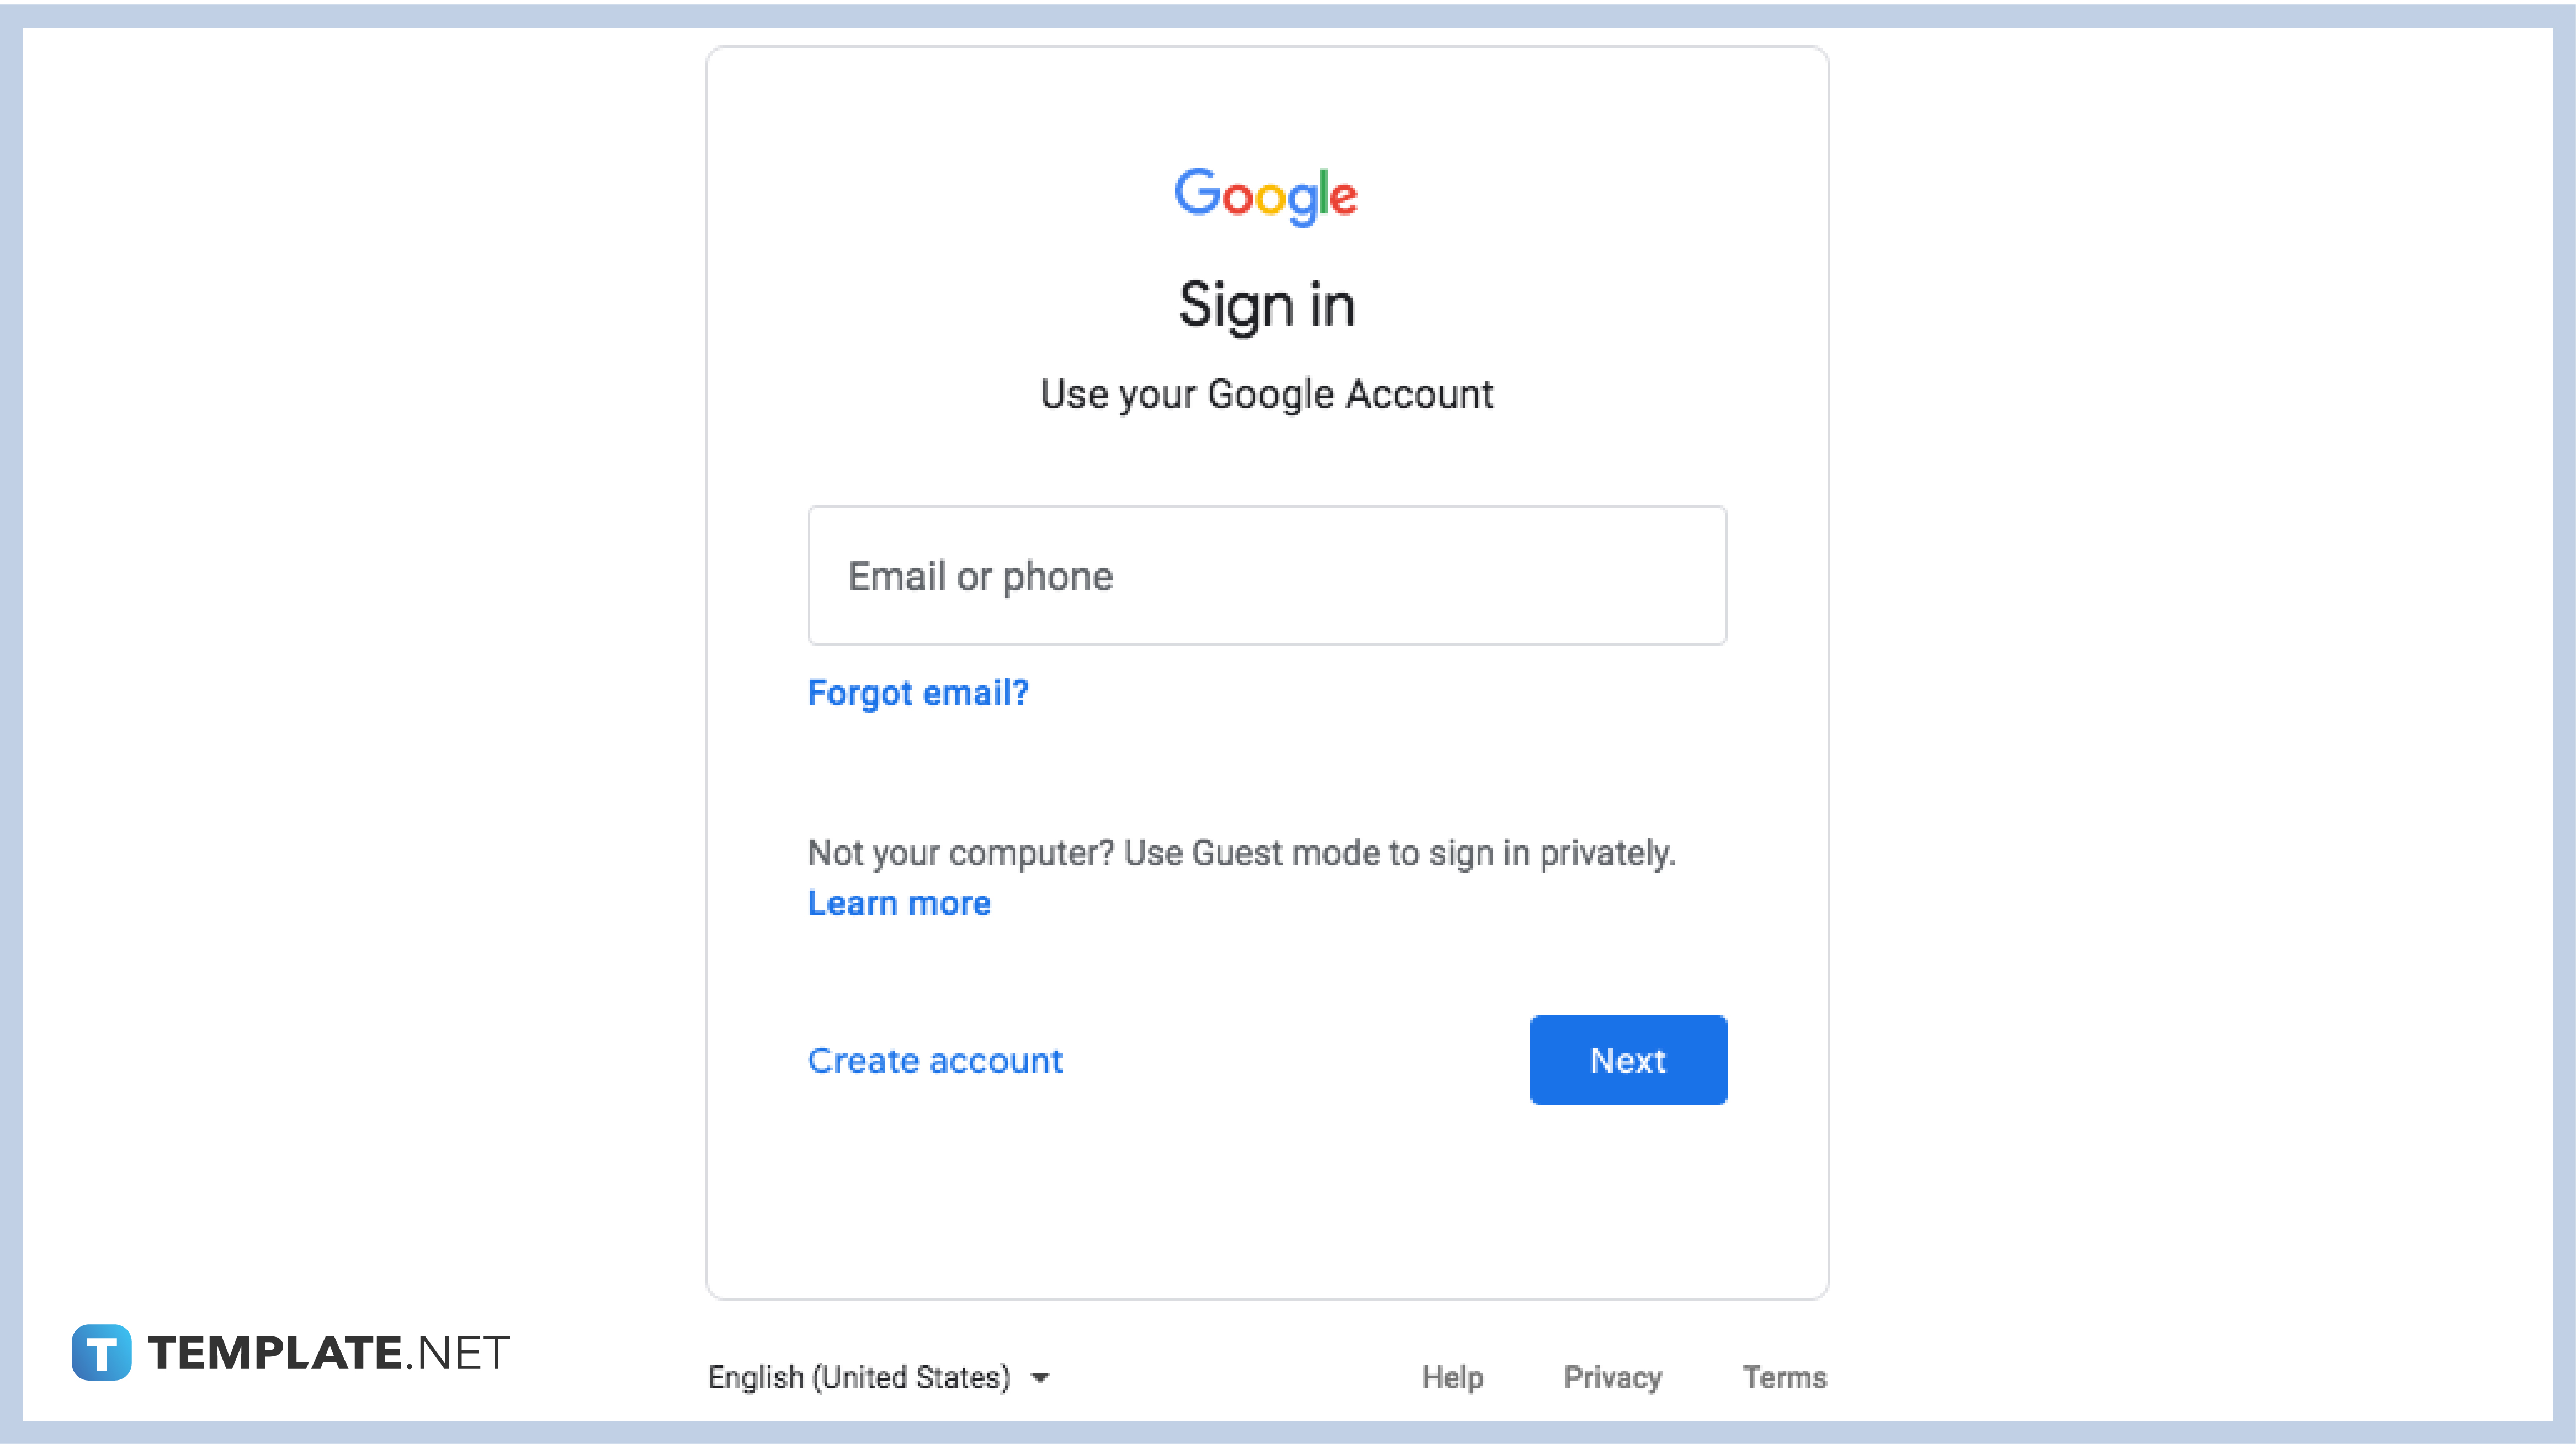 step-1-sign-in-with-your-account-01